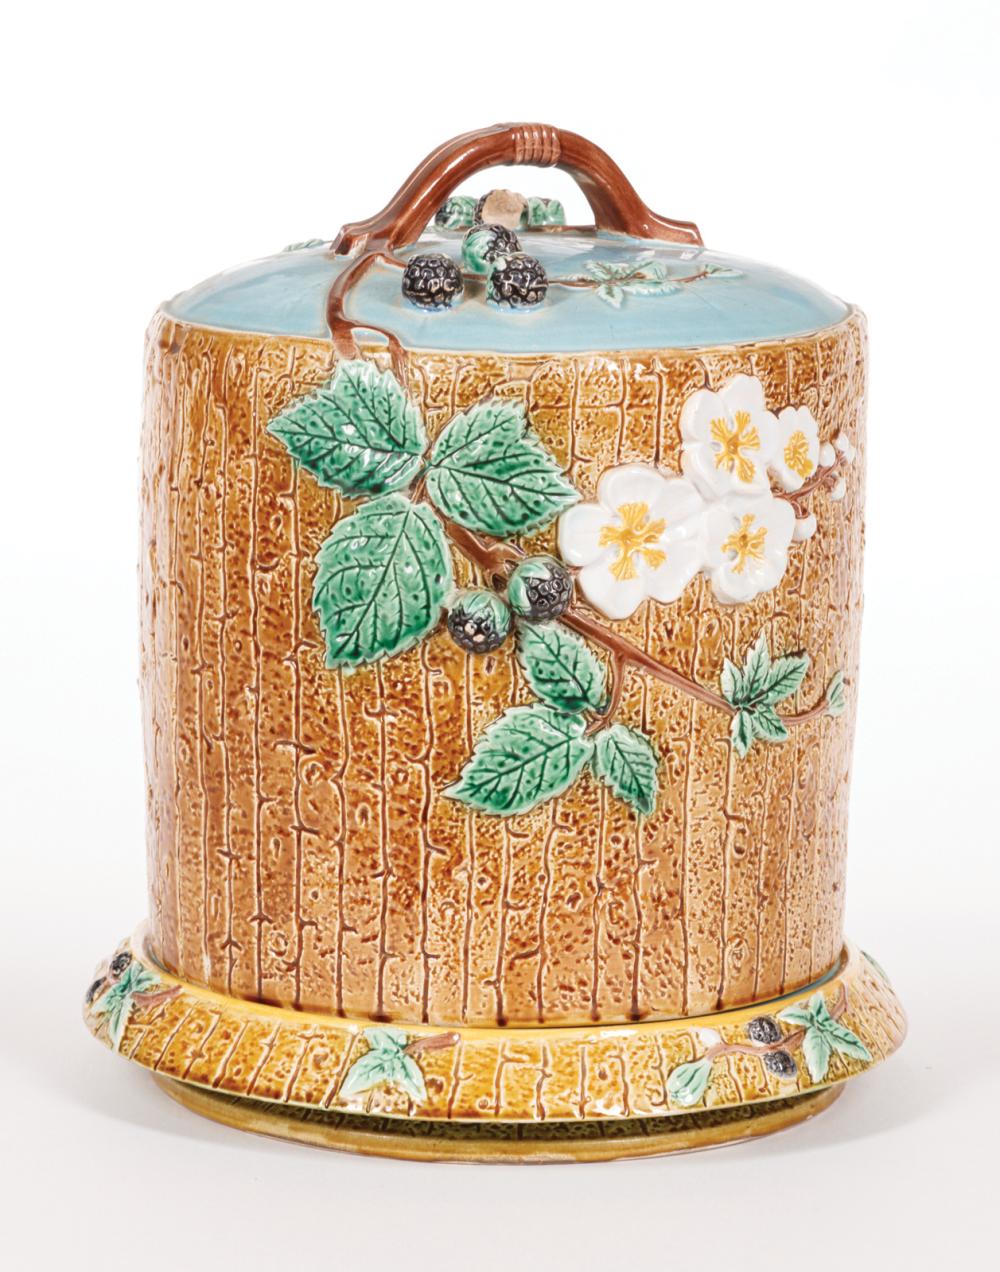 HOLDCROFT MAJOLICA CHEESE DOME 3190d3